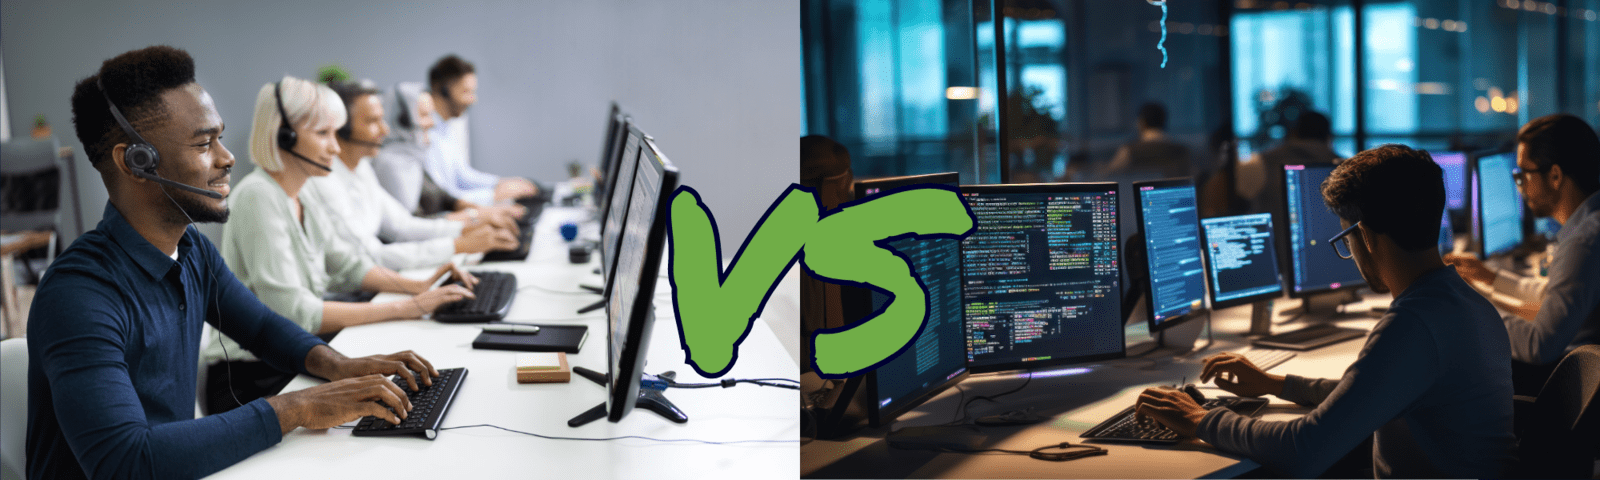 it support techs vs cybersecurity engineers